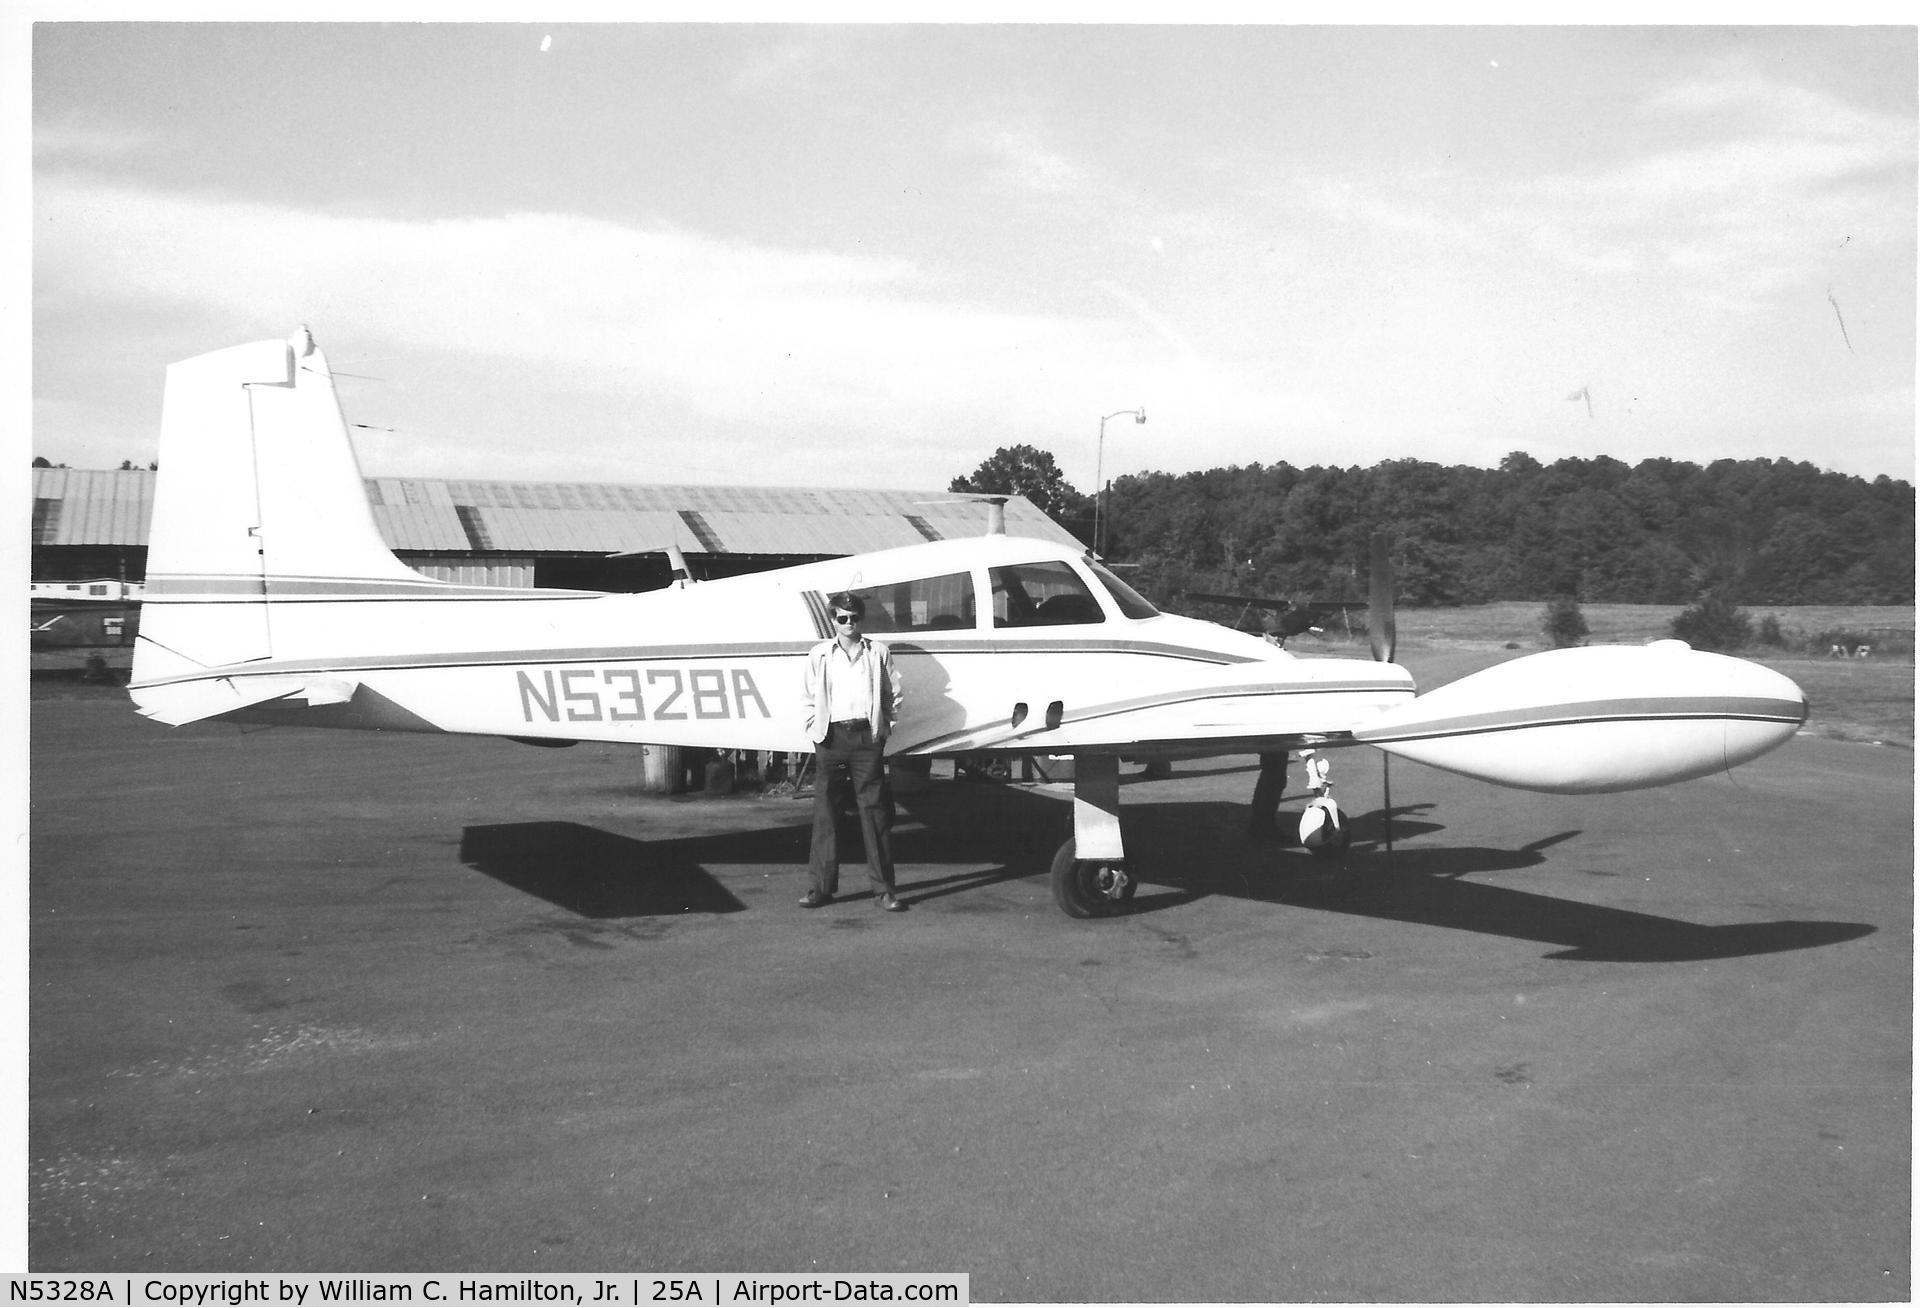 N5328A, Cessna 310 C/N 35528, Photo is circa 1979.  N5328A was a 1955 Cessna 310 used for multi-engine training and Part 135 service from McMinn Airport (25A) in Weaver, AL.  Aircraft experienced right main landing gear failure some years later and was not returned to service.